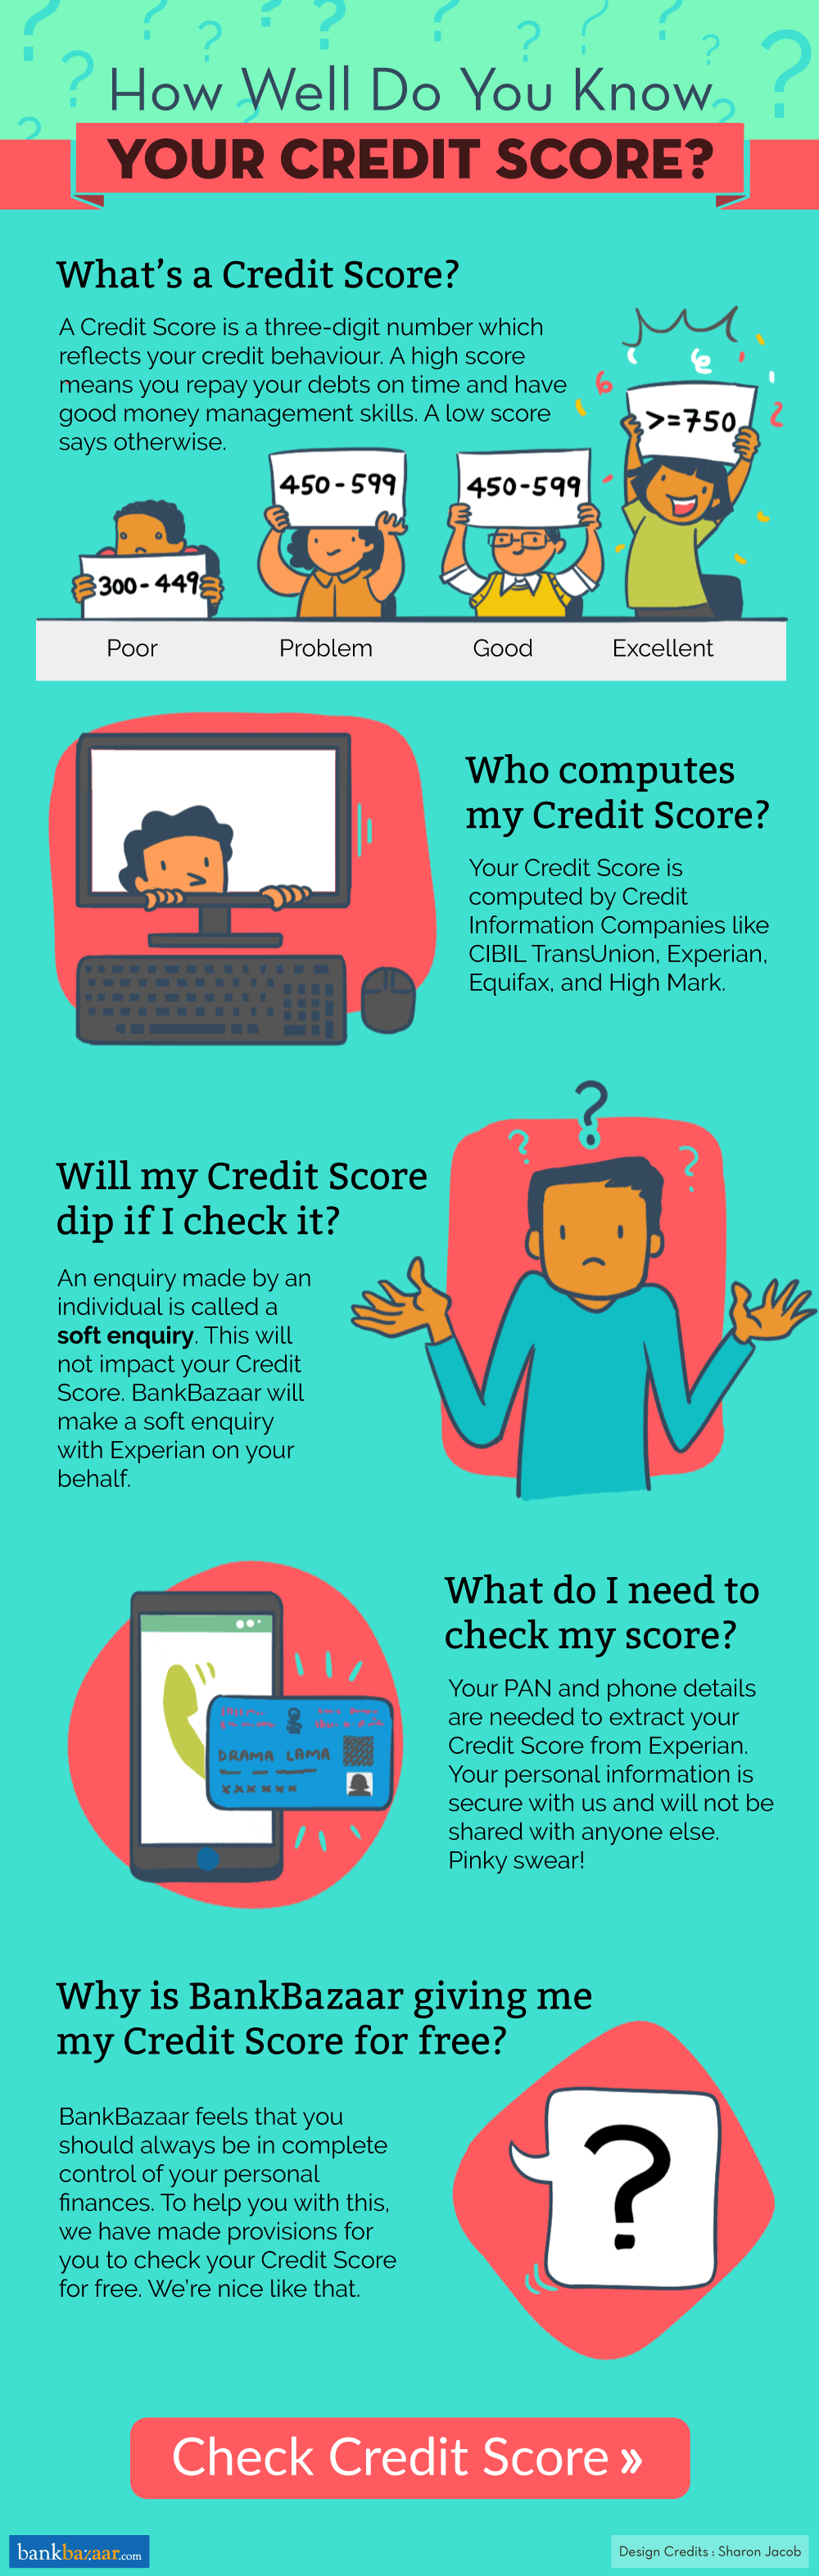 How Well Do You Know Your Credit Score?